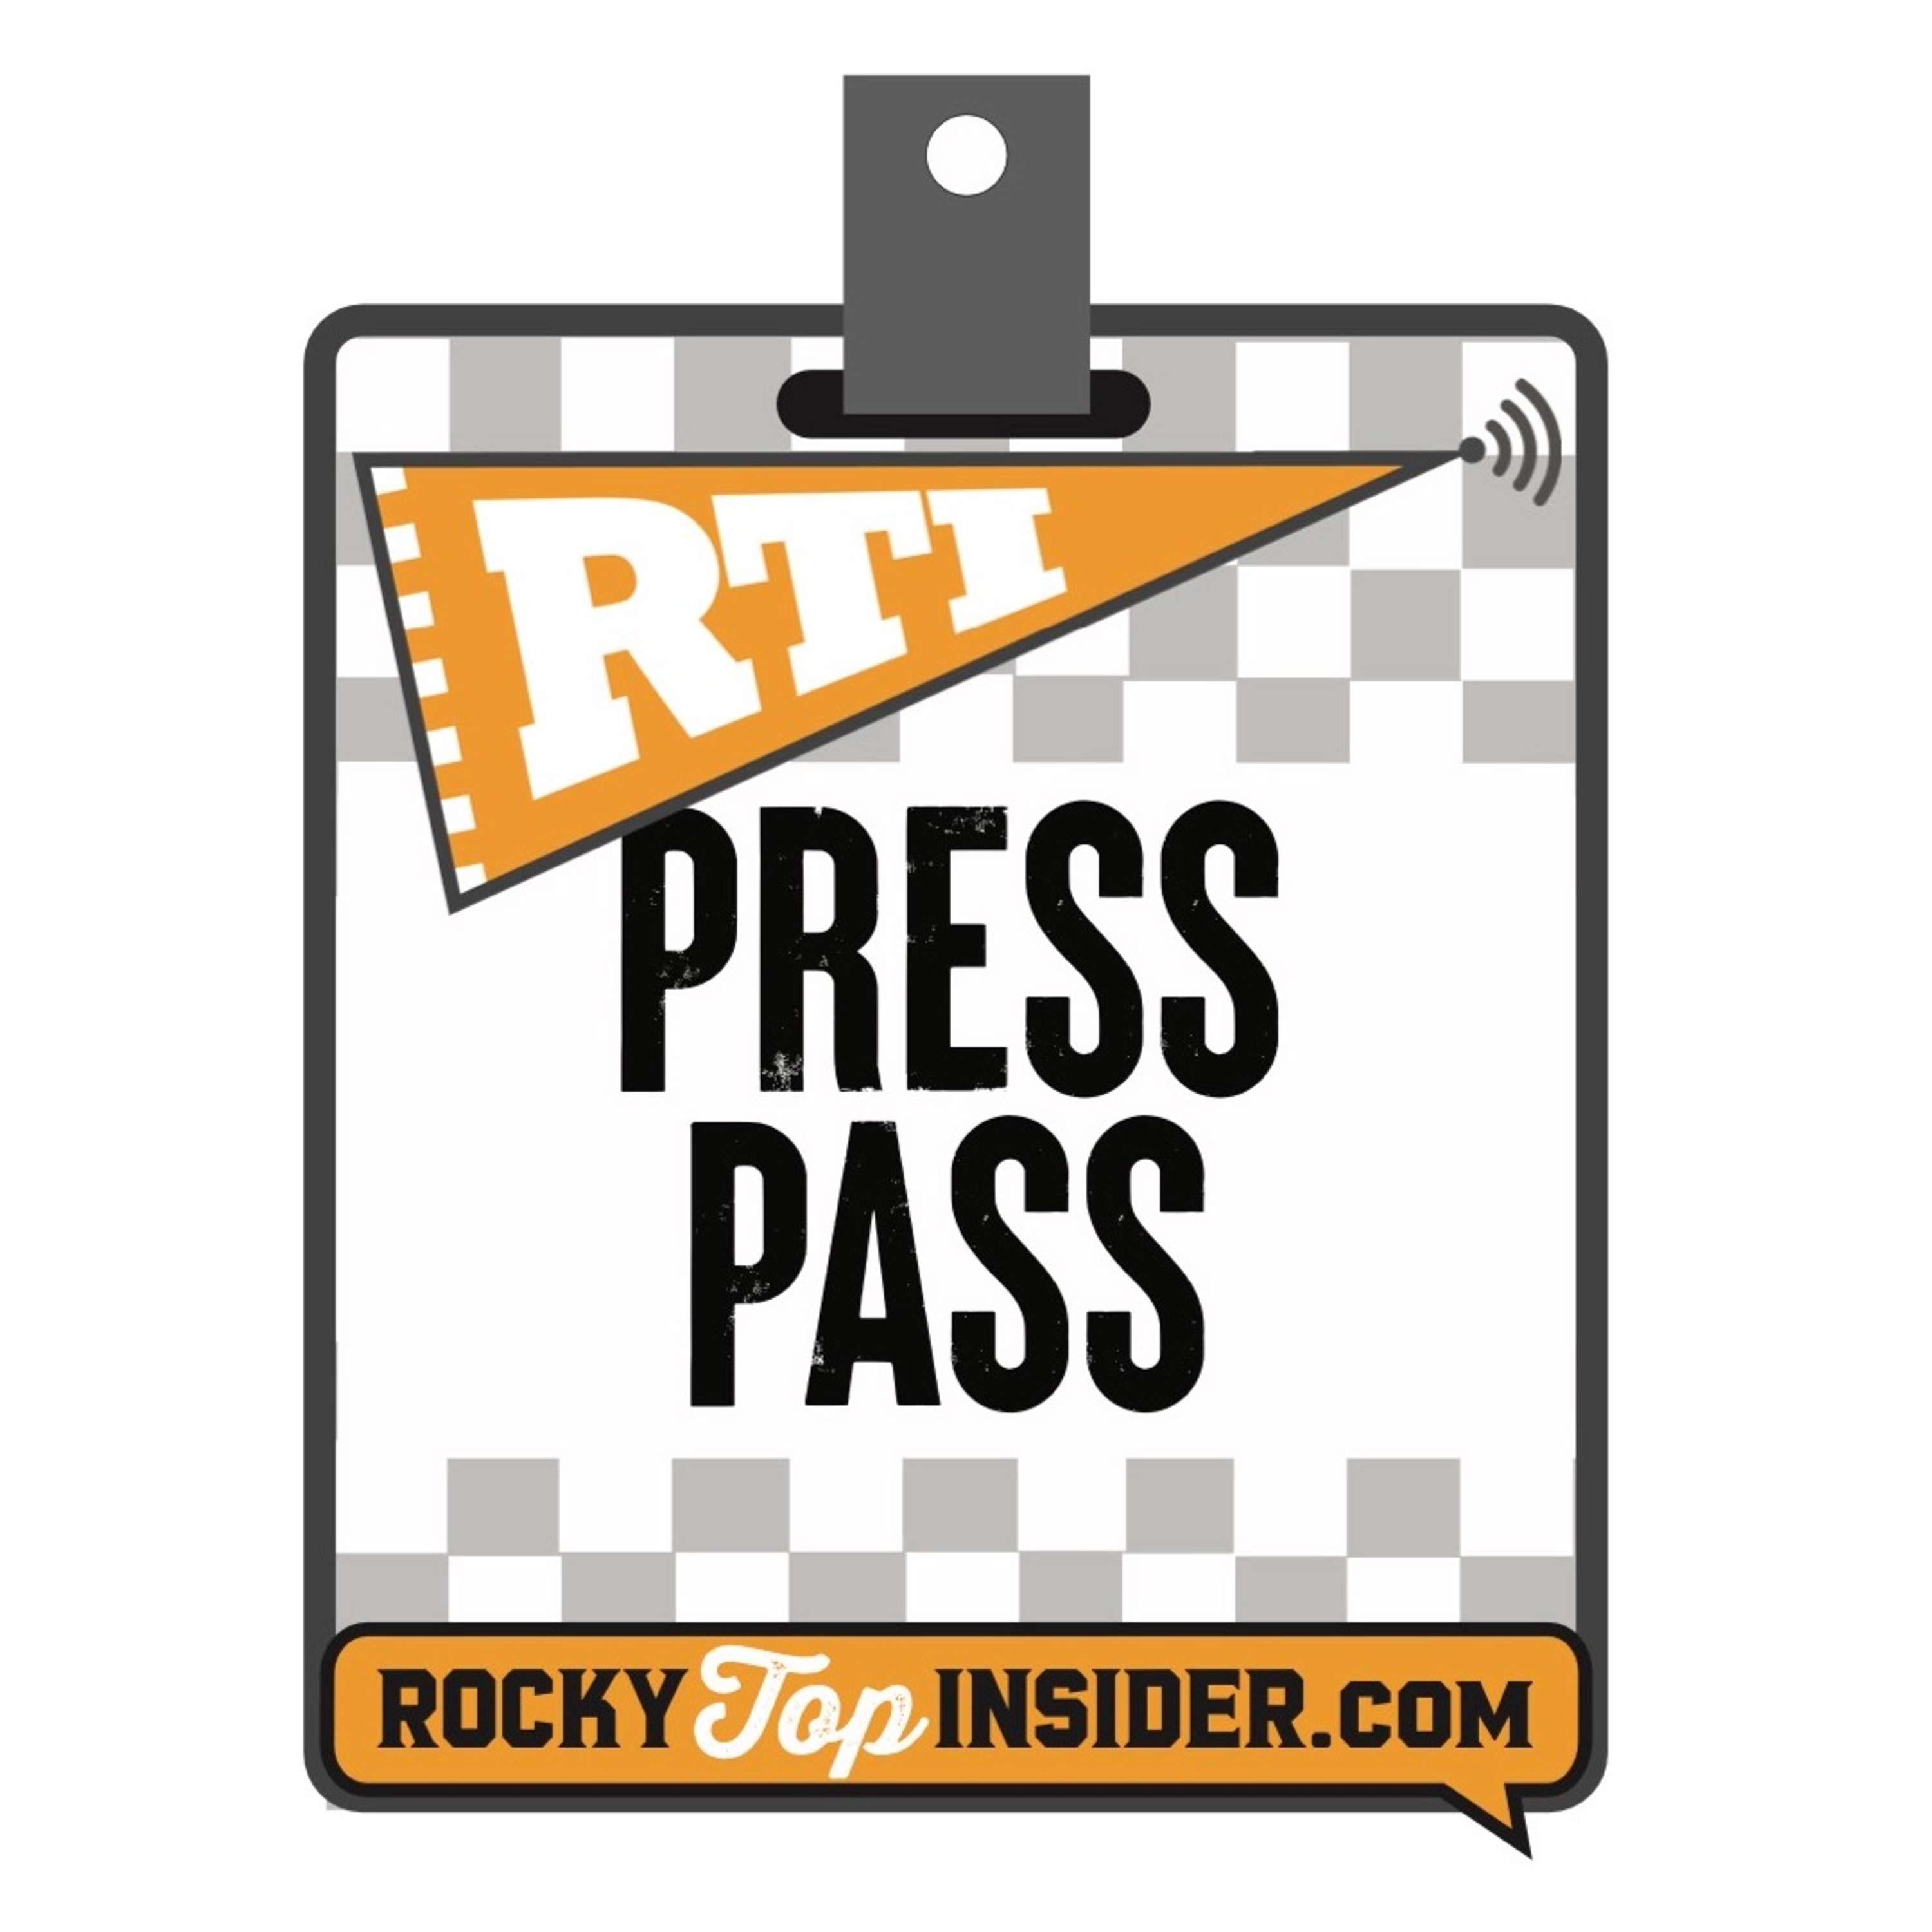 Georgia Series Win Reaction, Tennessee Pitching Thoughts | RTI Press Pass Baseball Podcast